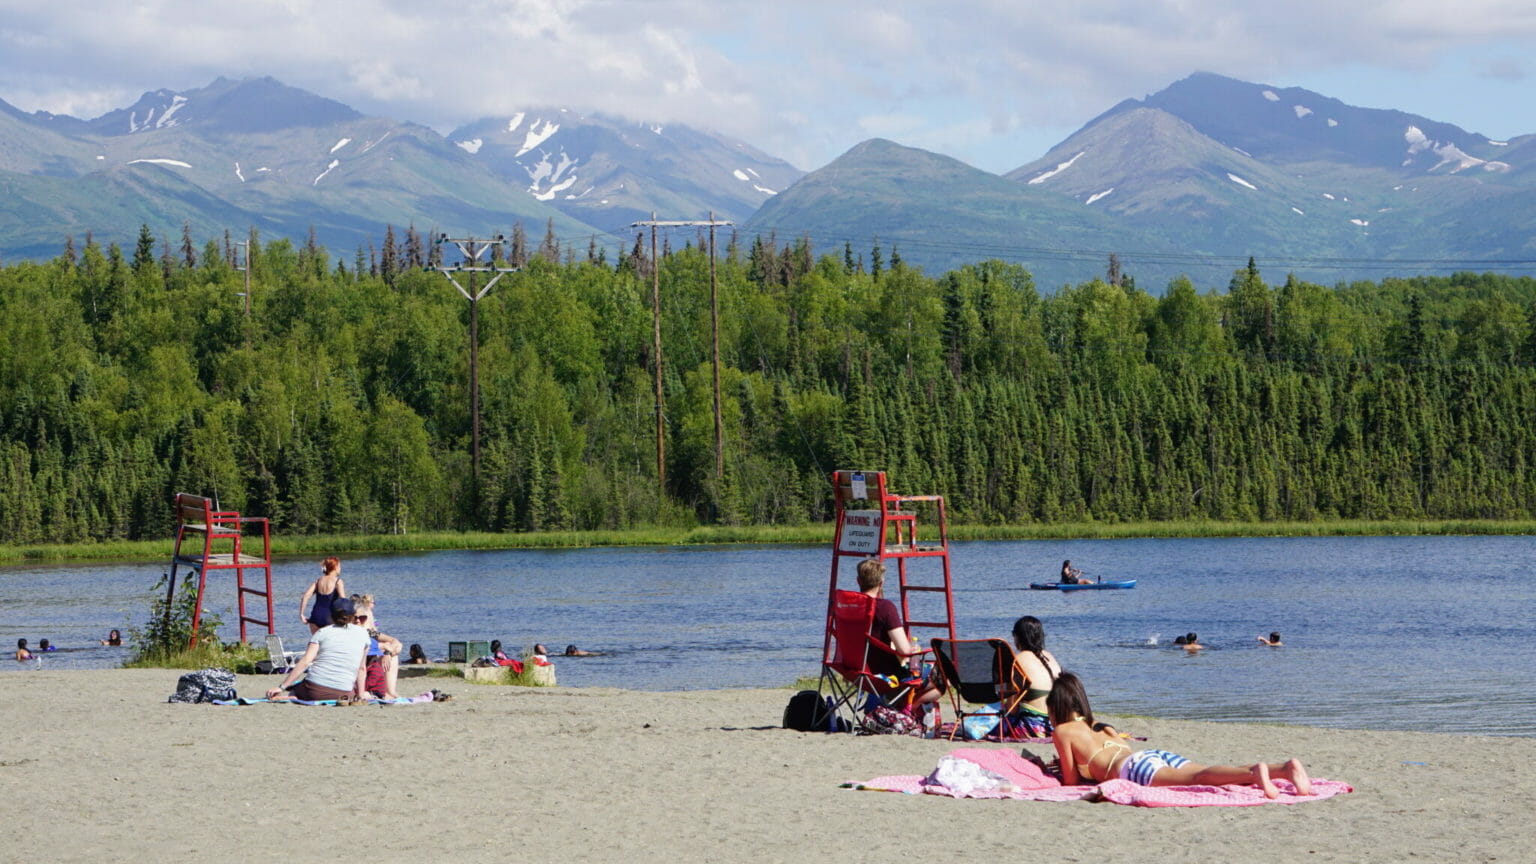 Pin on 2012: Our 100 Days of Summer Fun in Alaska